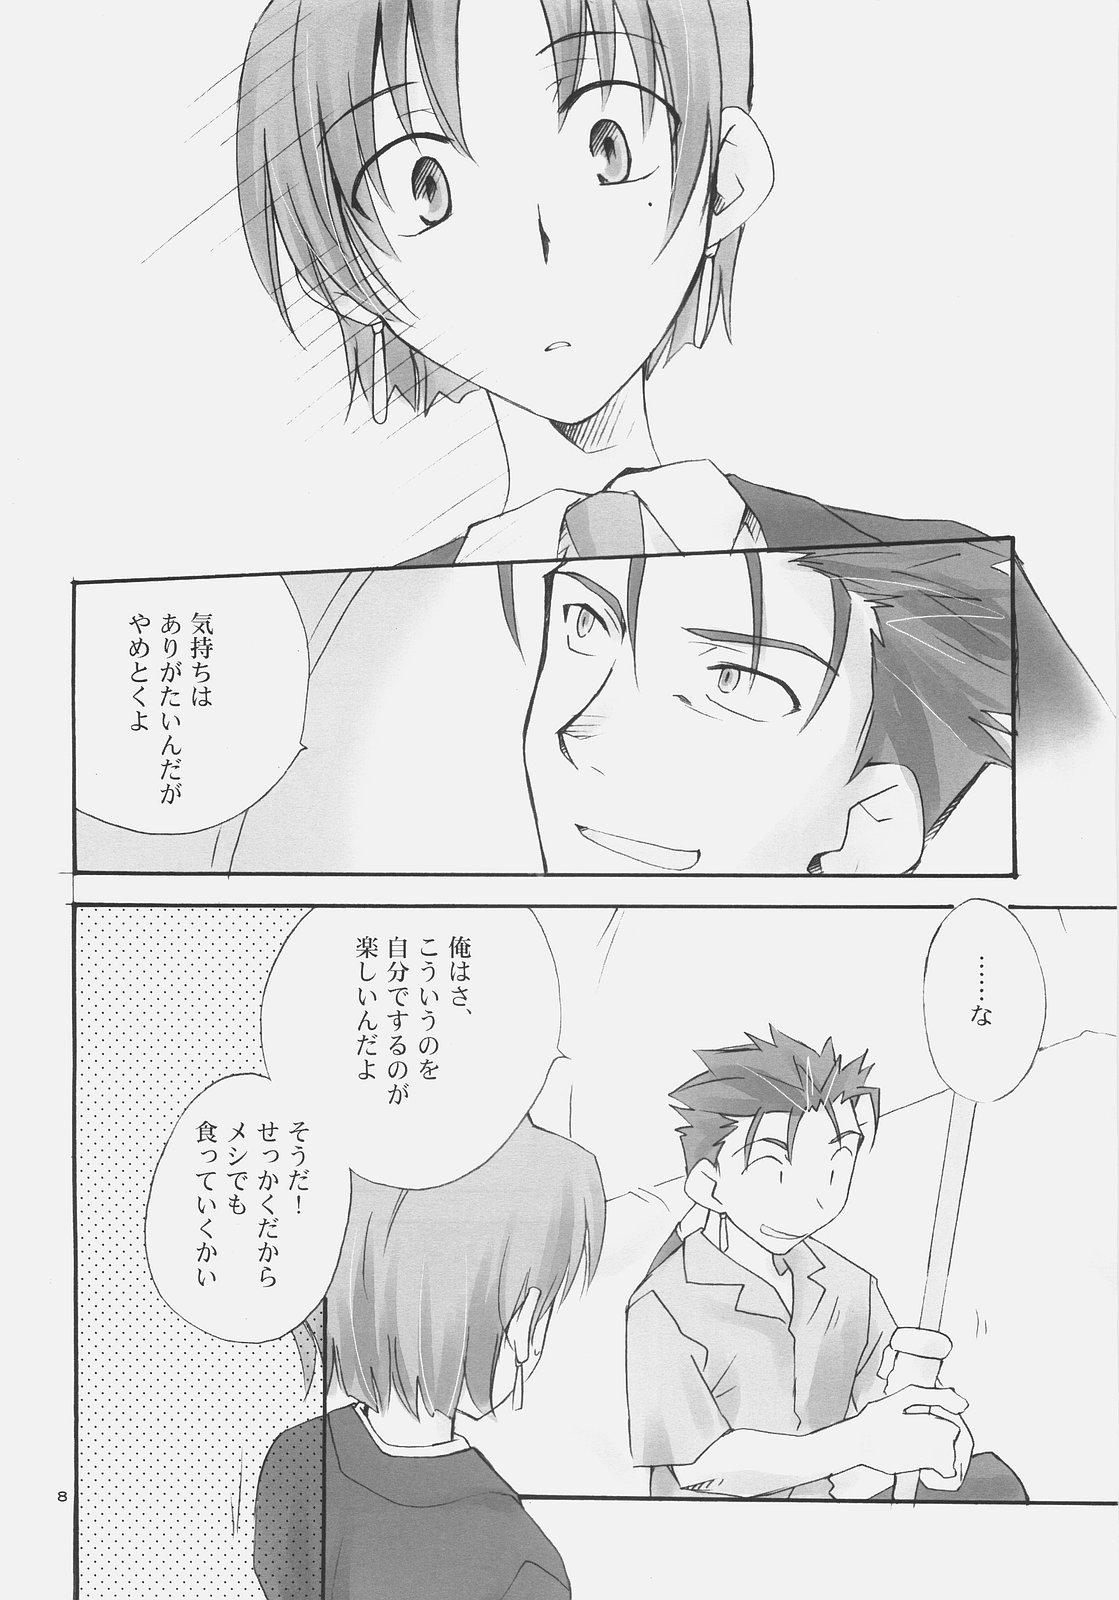 Desperate Charming - Fate hollow ataraxia Gay Friend - Page 7